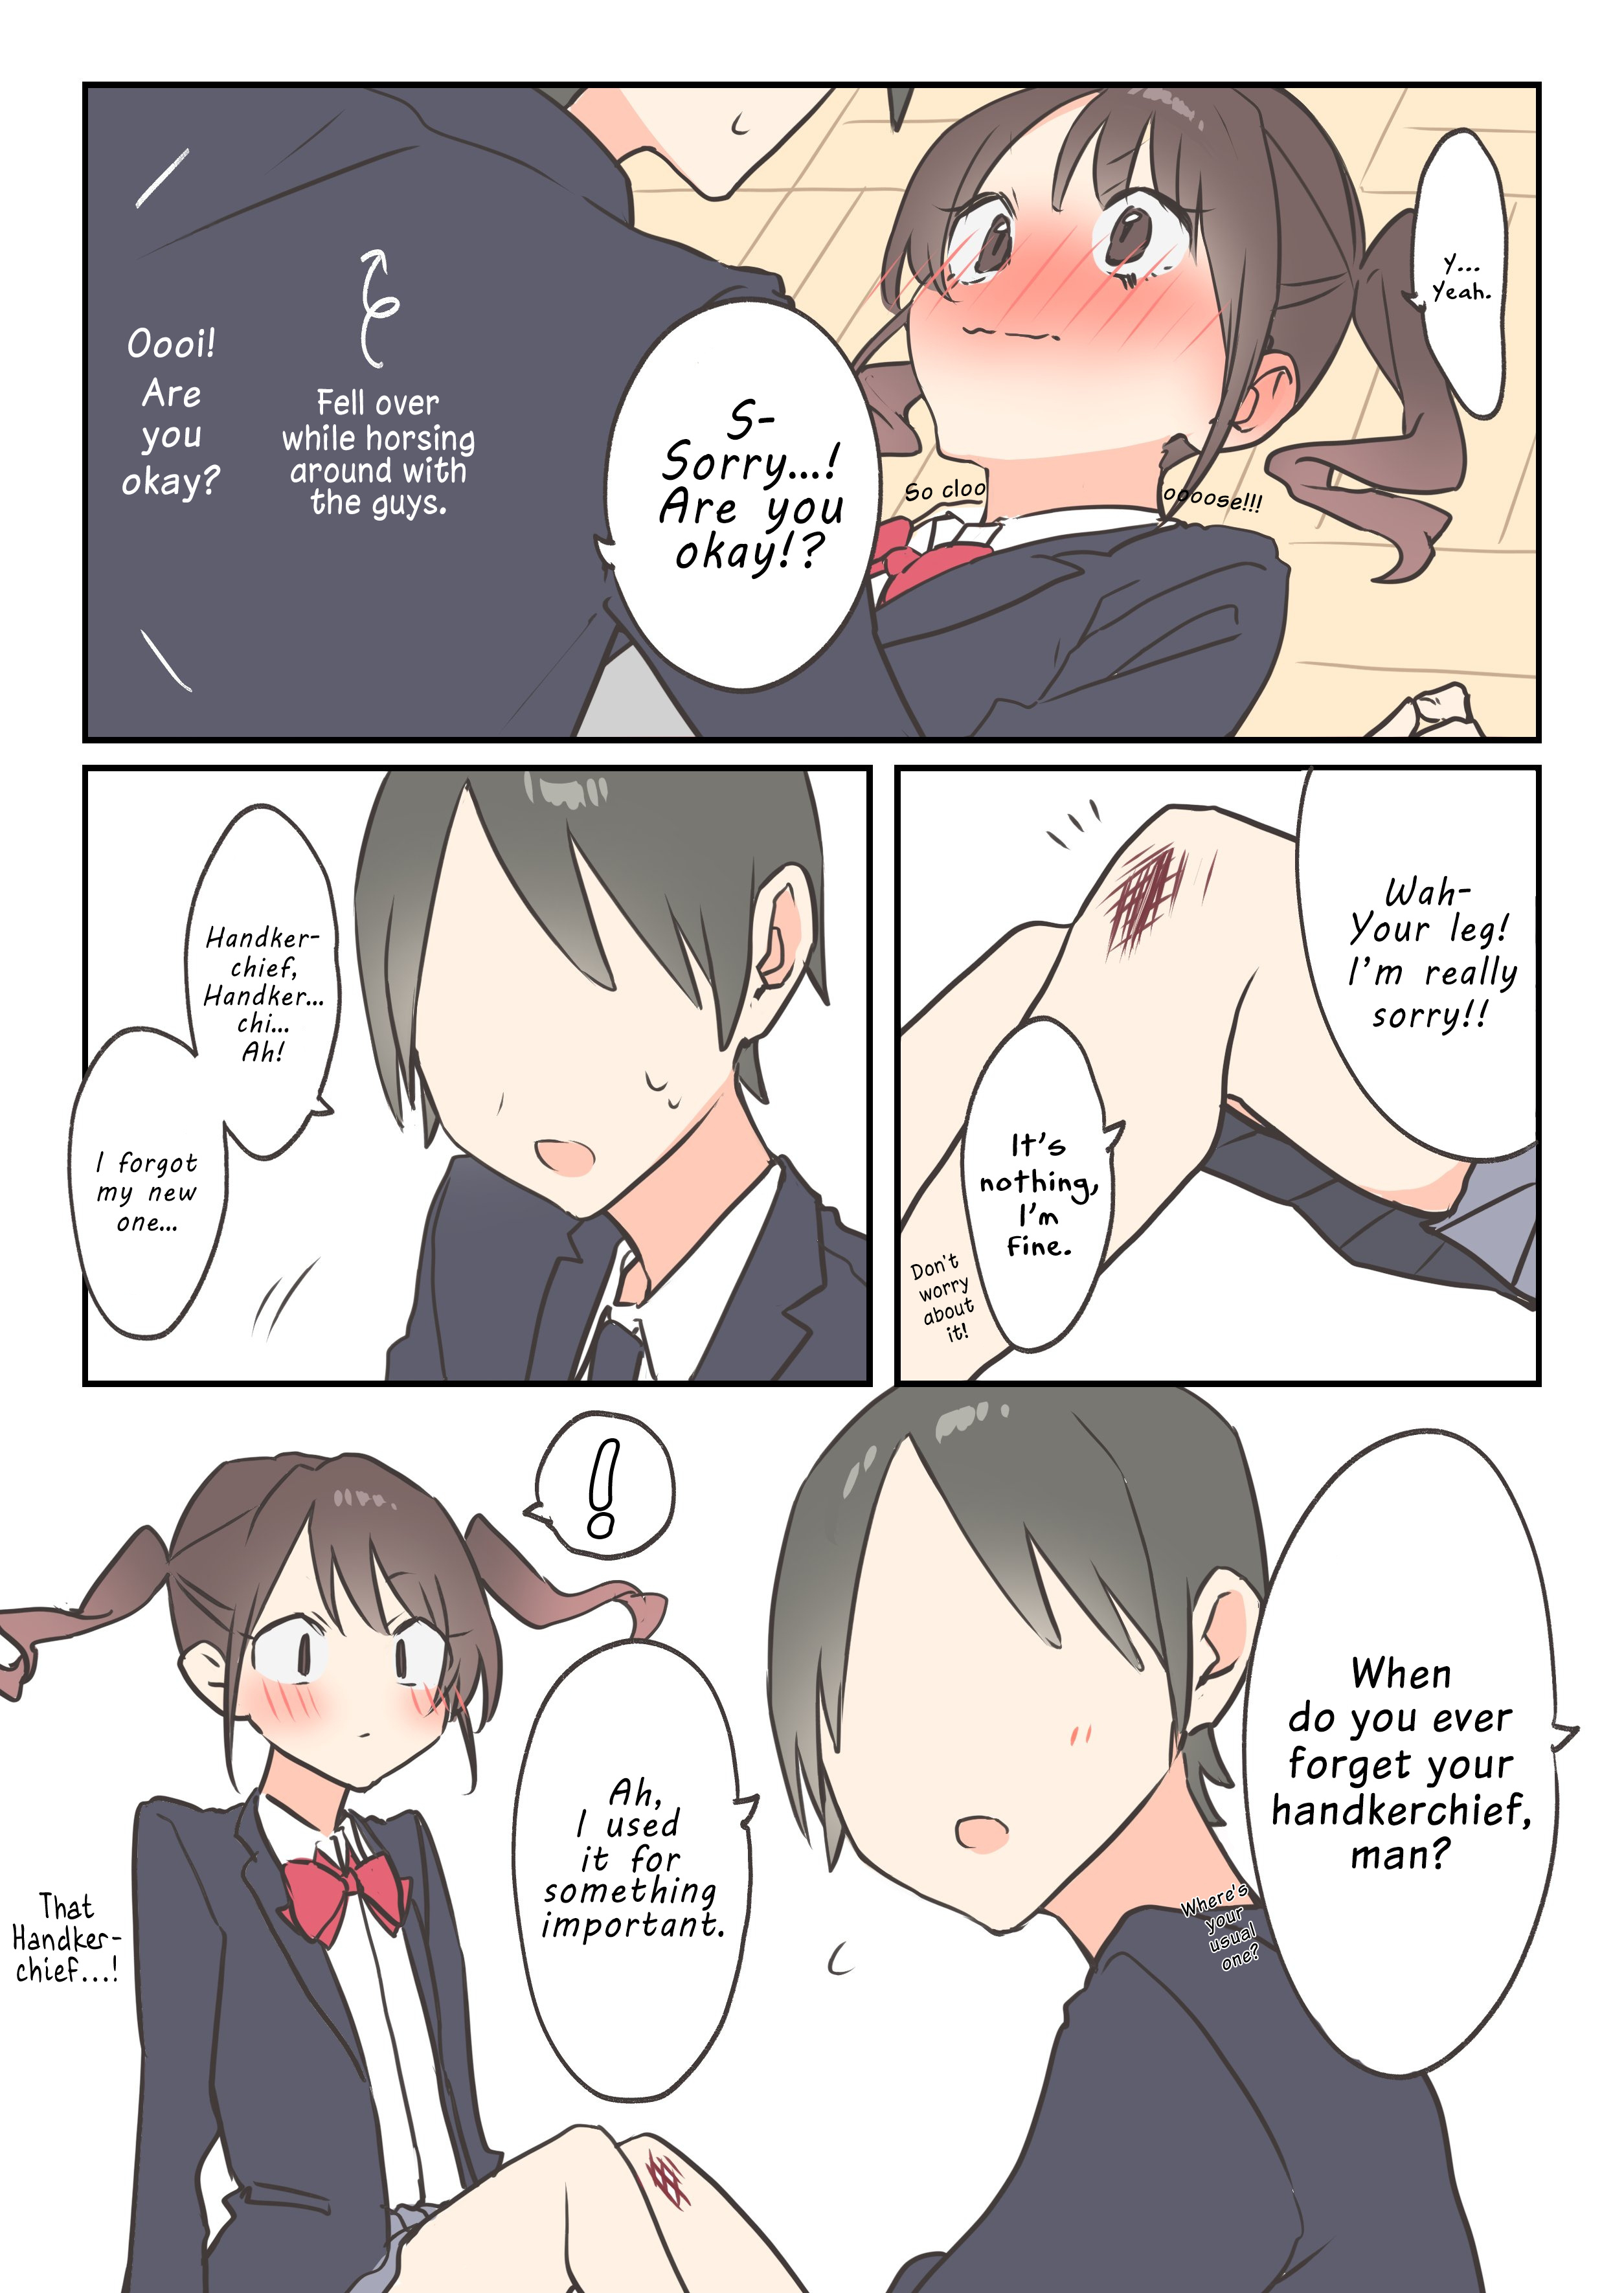 Blushing Because Of You (Webcomic) Vol.1 Chapter 9: 